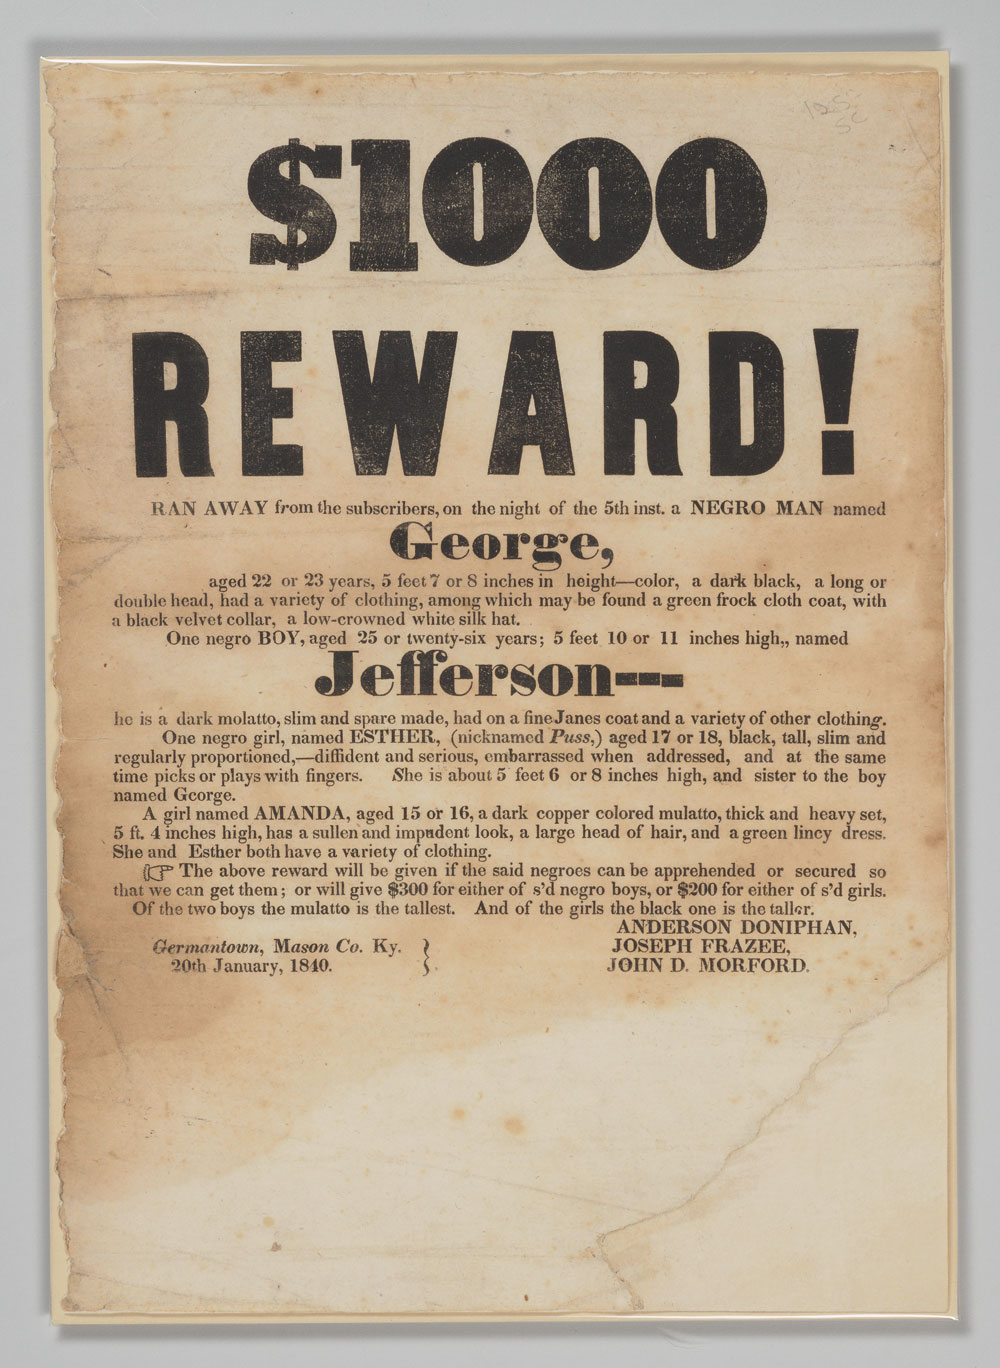 Advertisements for fugitive slaves offer a glimpse into their lives.